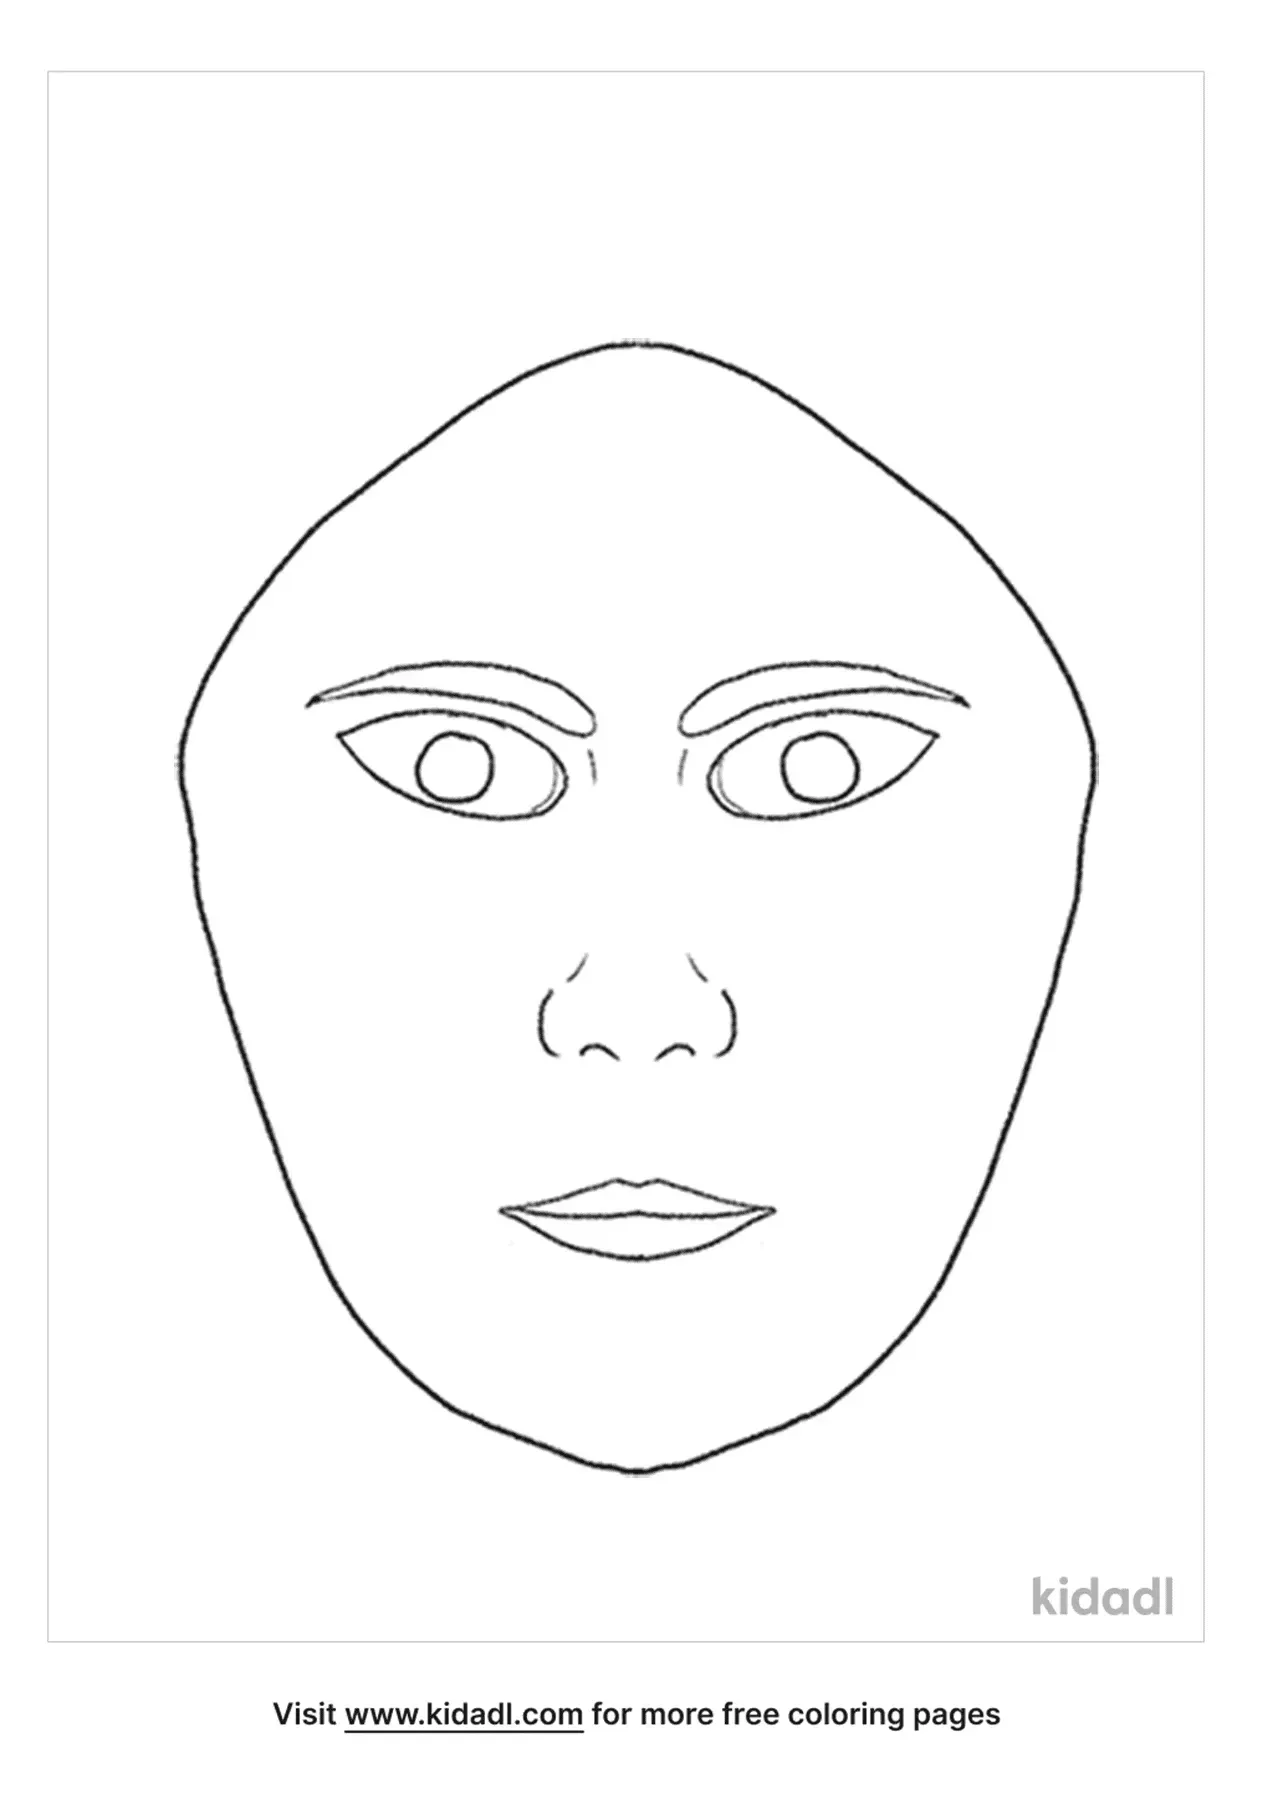 Free Makeup Faces Coloring Page